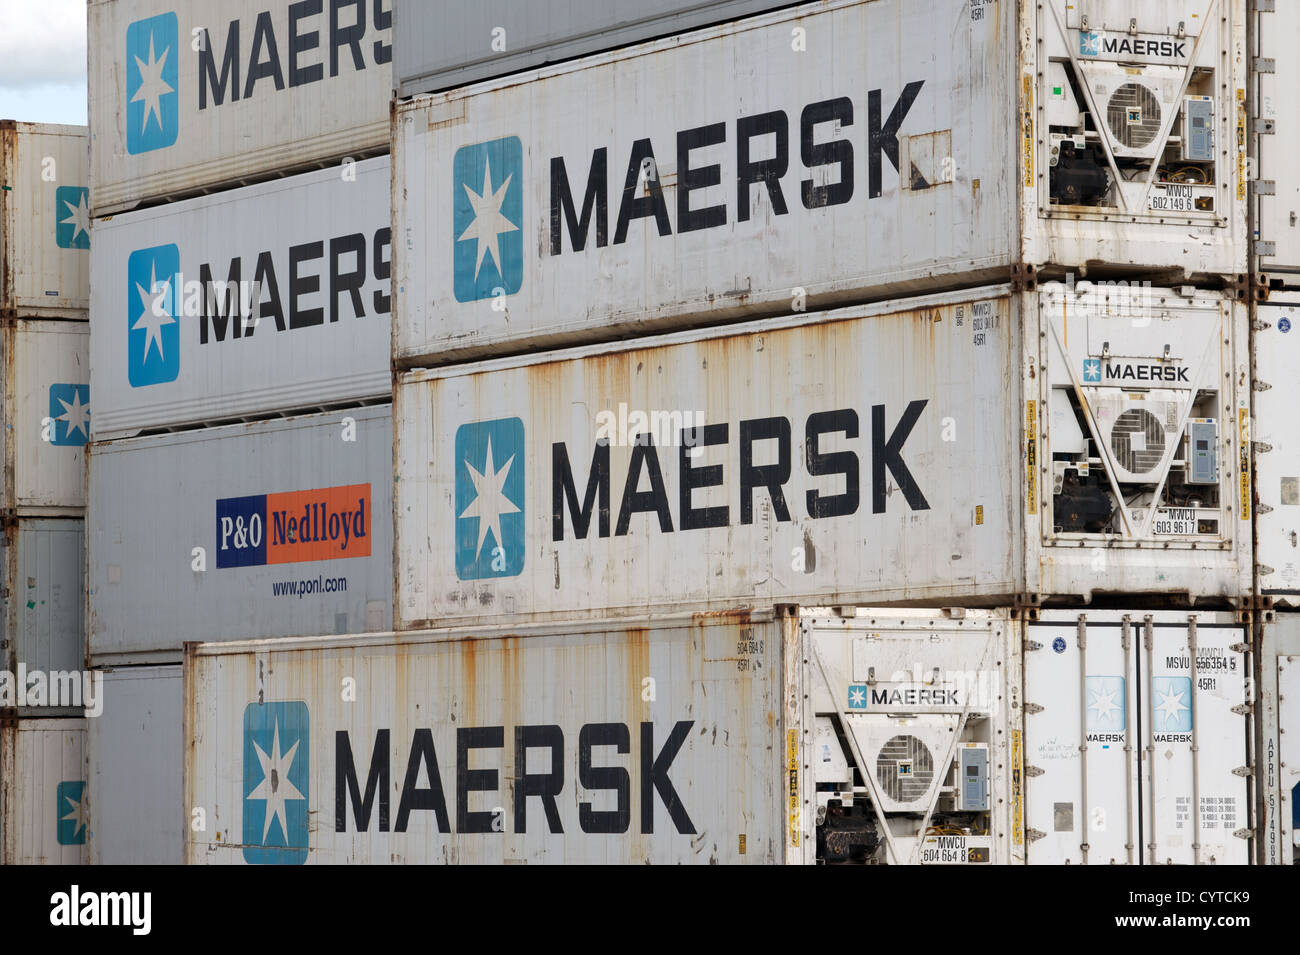 Maersk containers Stock Photo